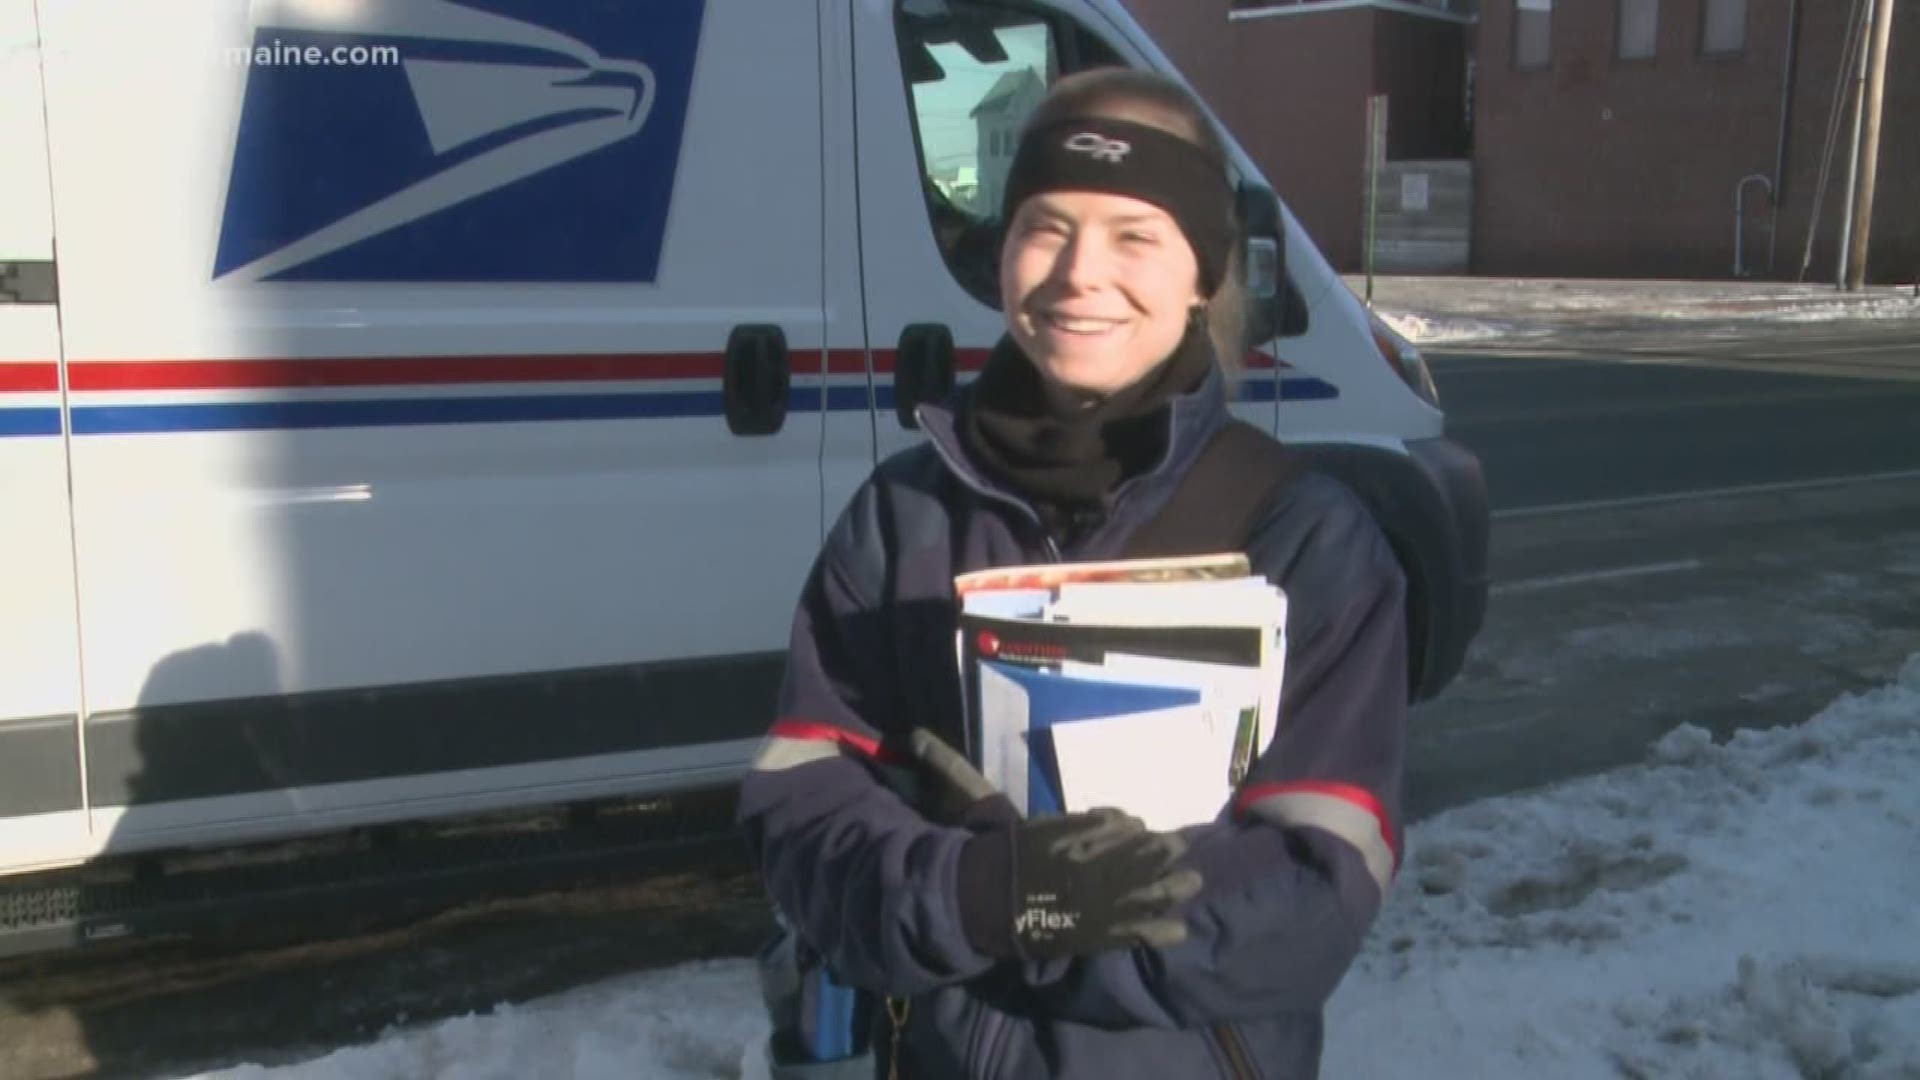 USPS mail carriers have one of the coldest jobs